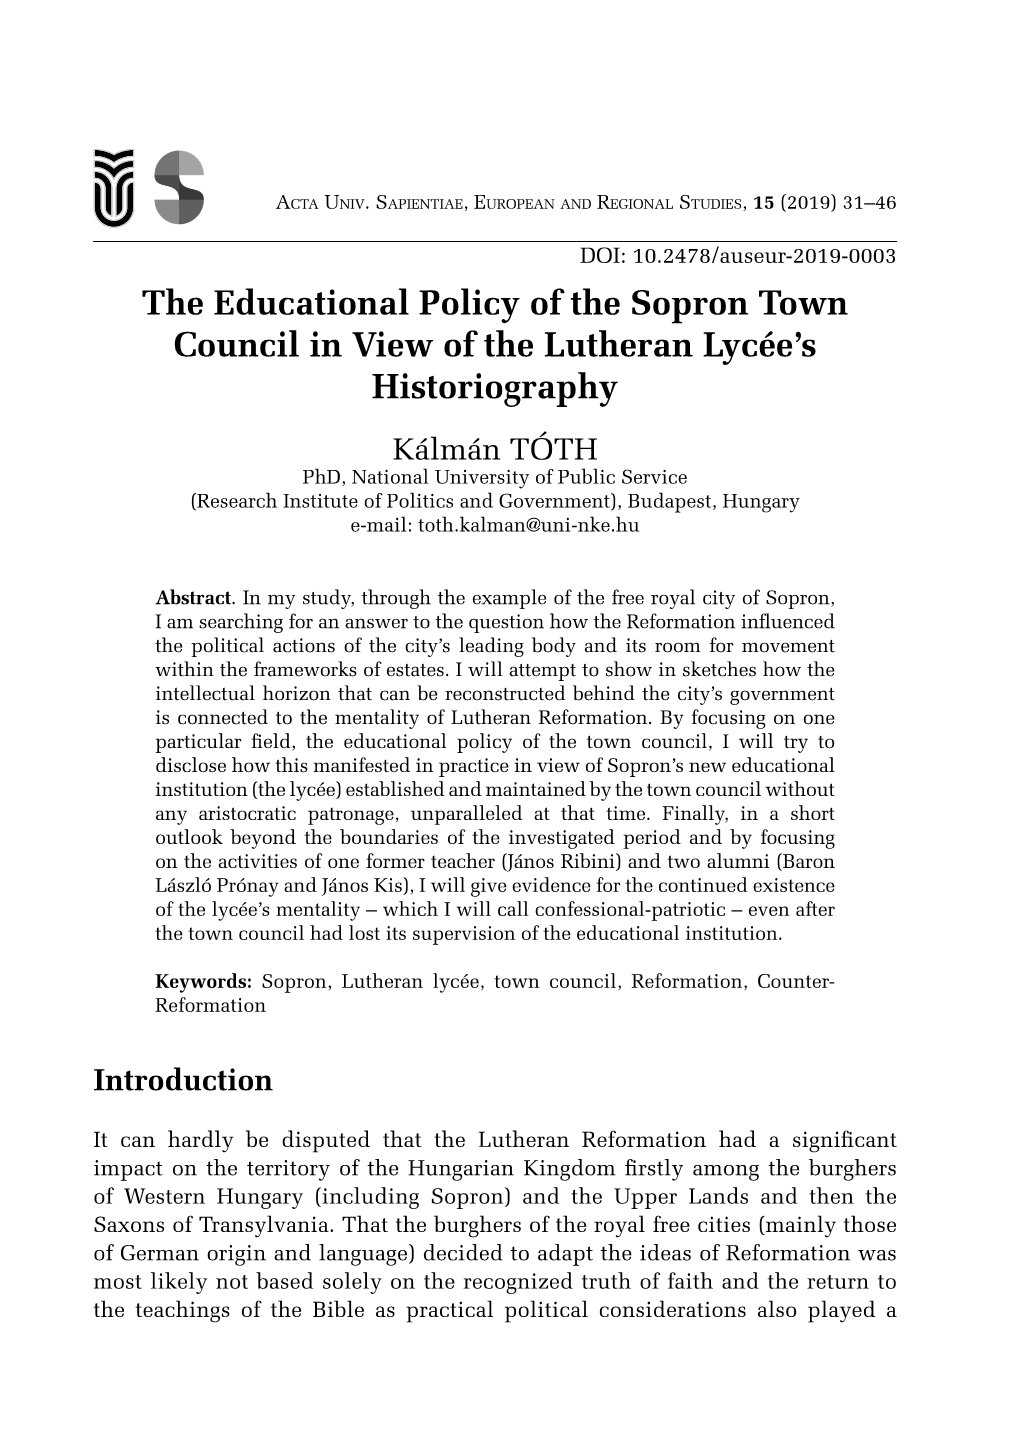 The Educational Policy of the Sopron Town Council in View of The